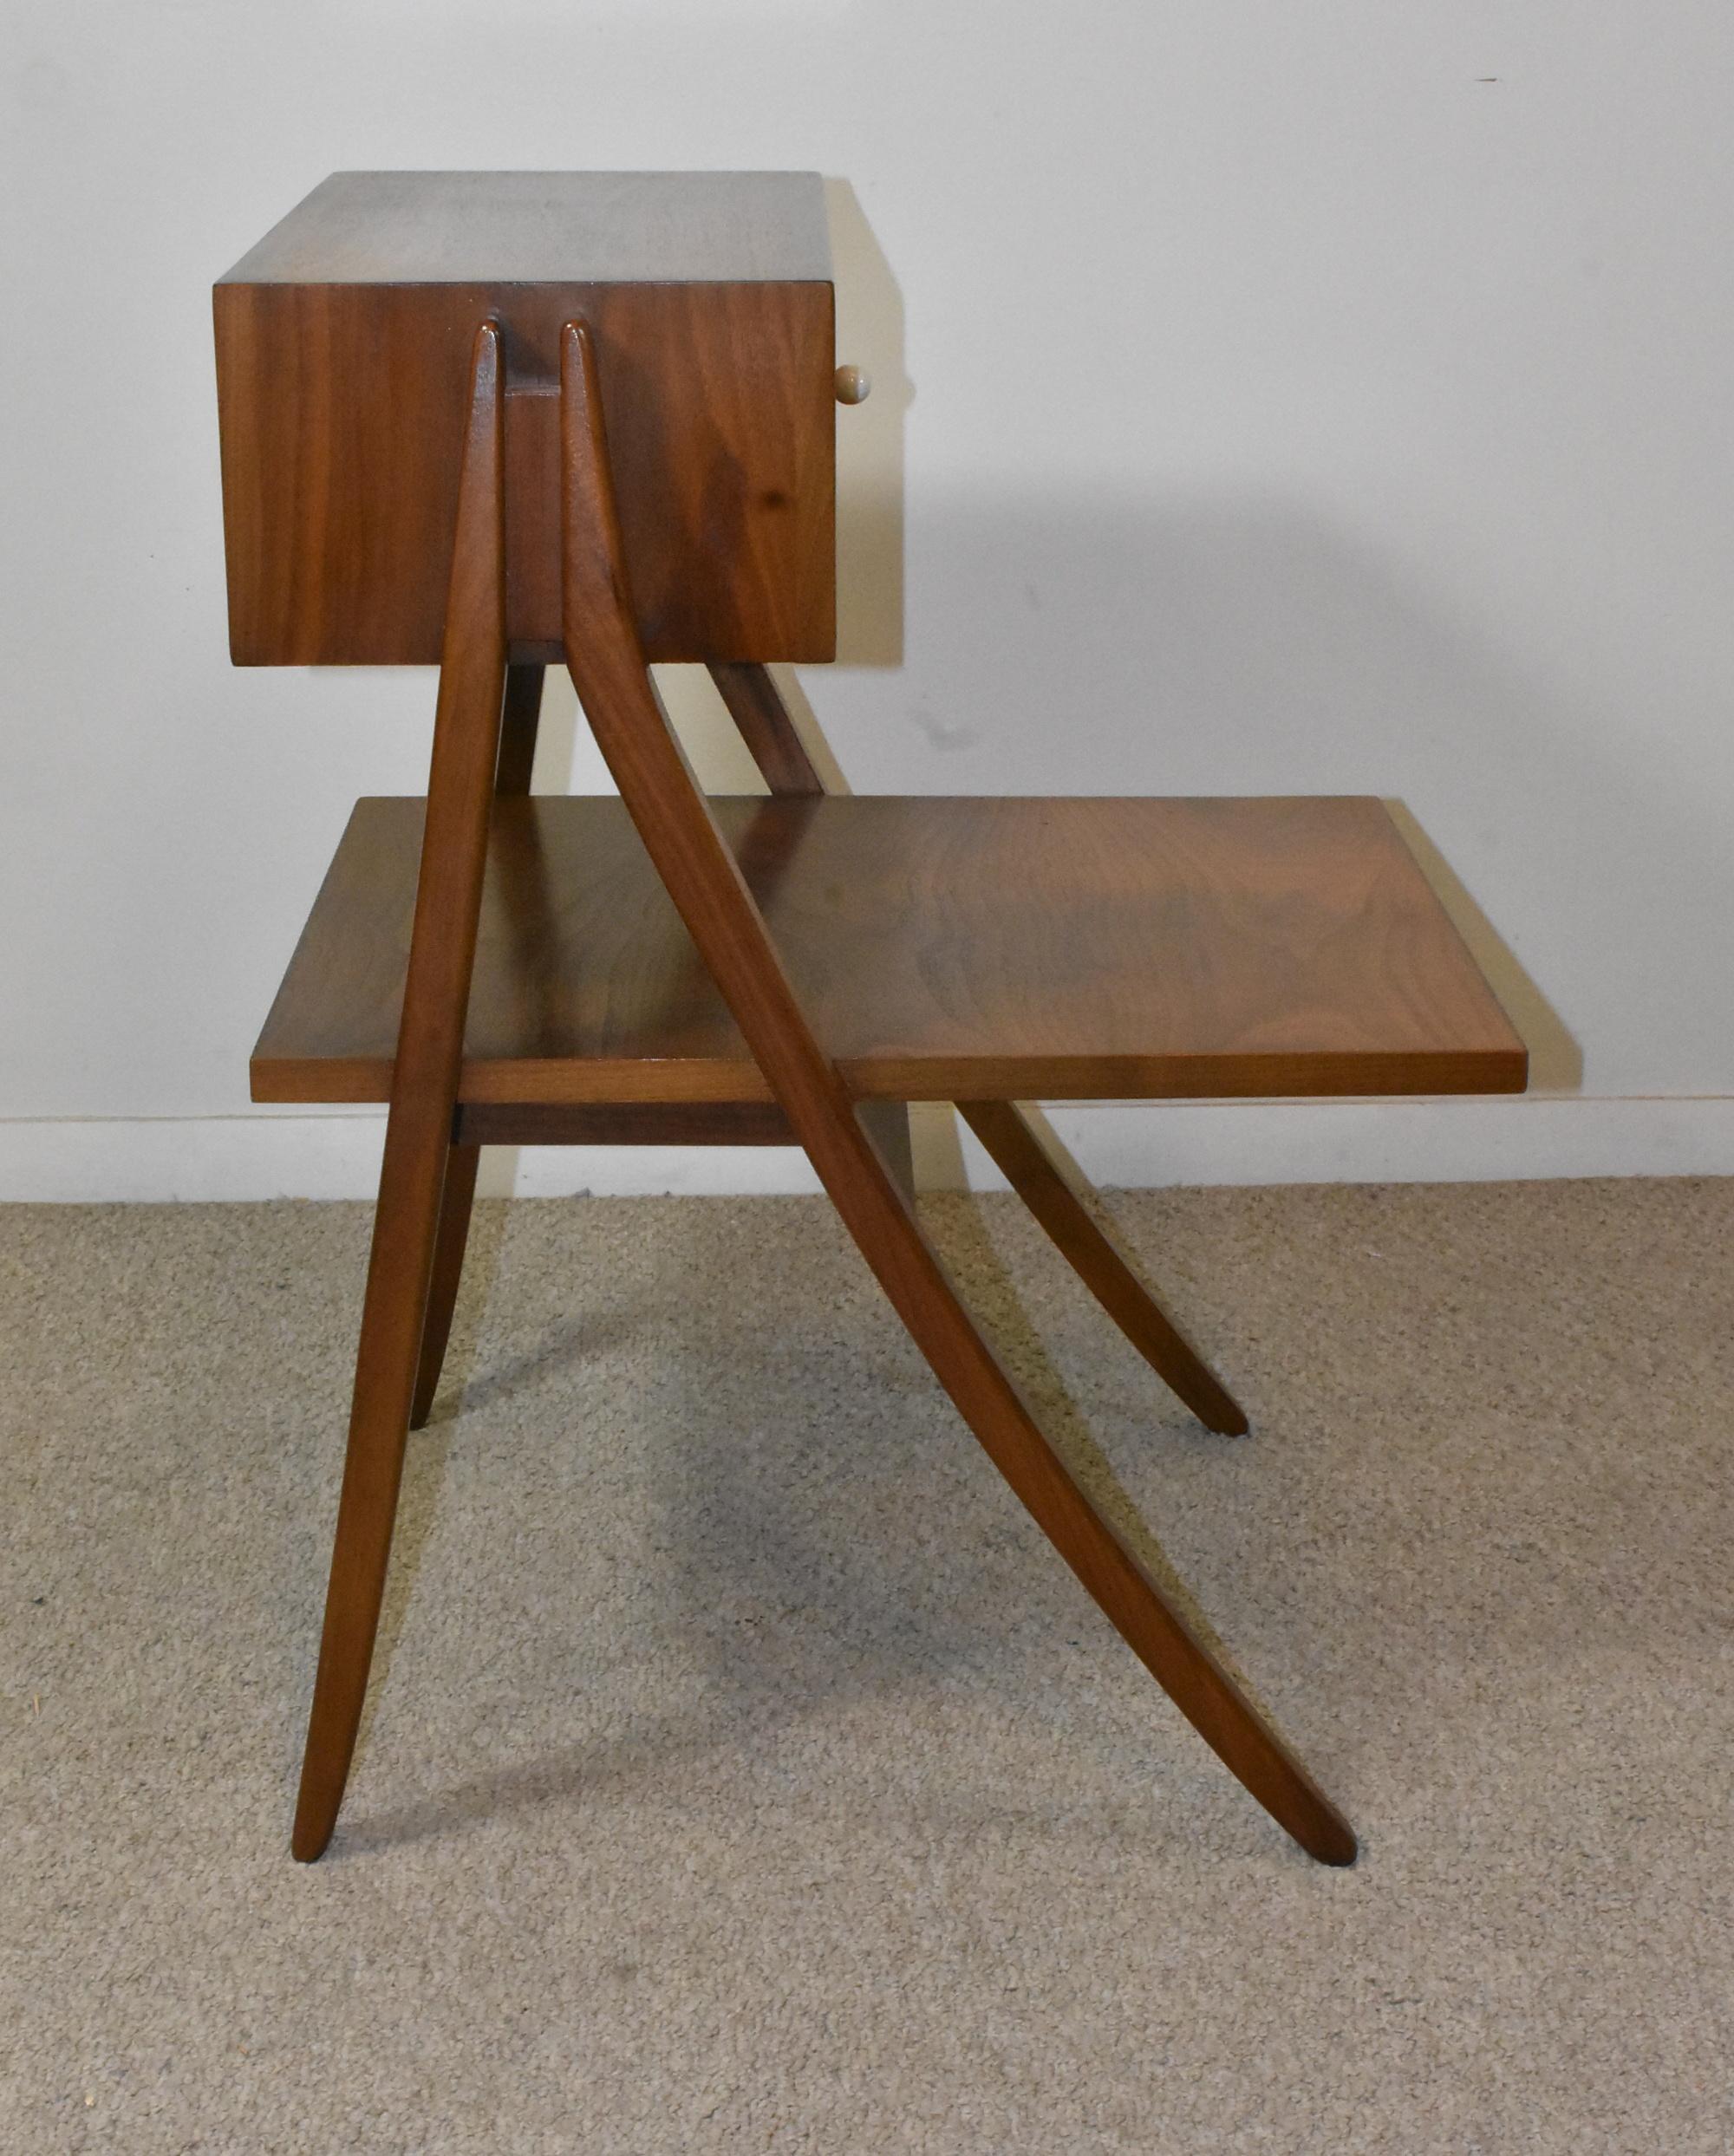 Walnut night stand by Kipp Stewart design for Drexel. Single drawer with overhanging shelf. Drexel stamp in the drawer. 21